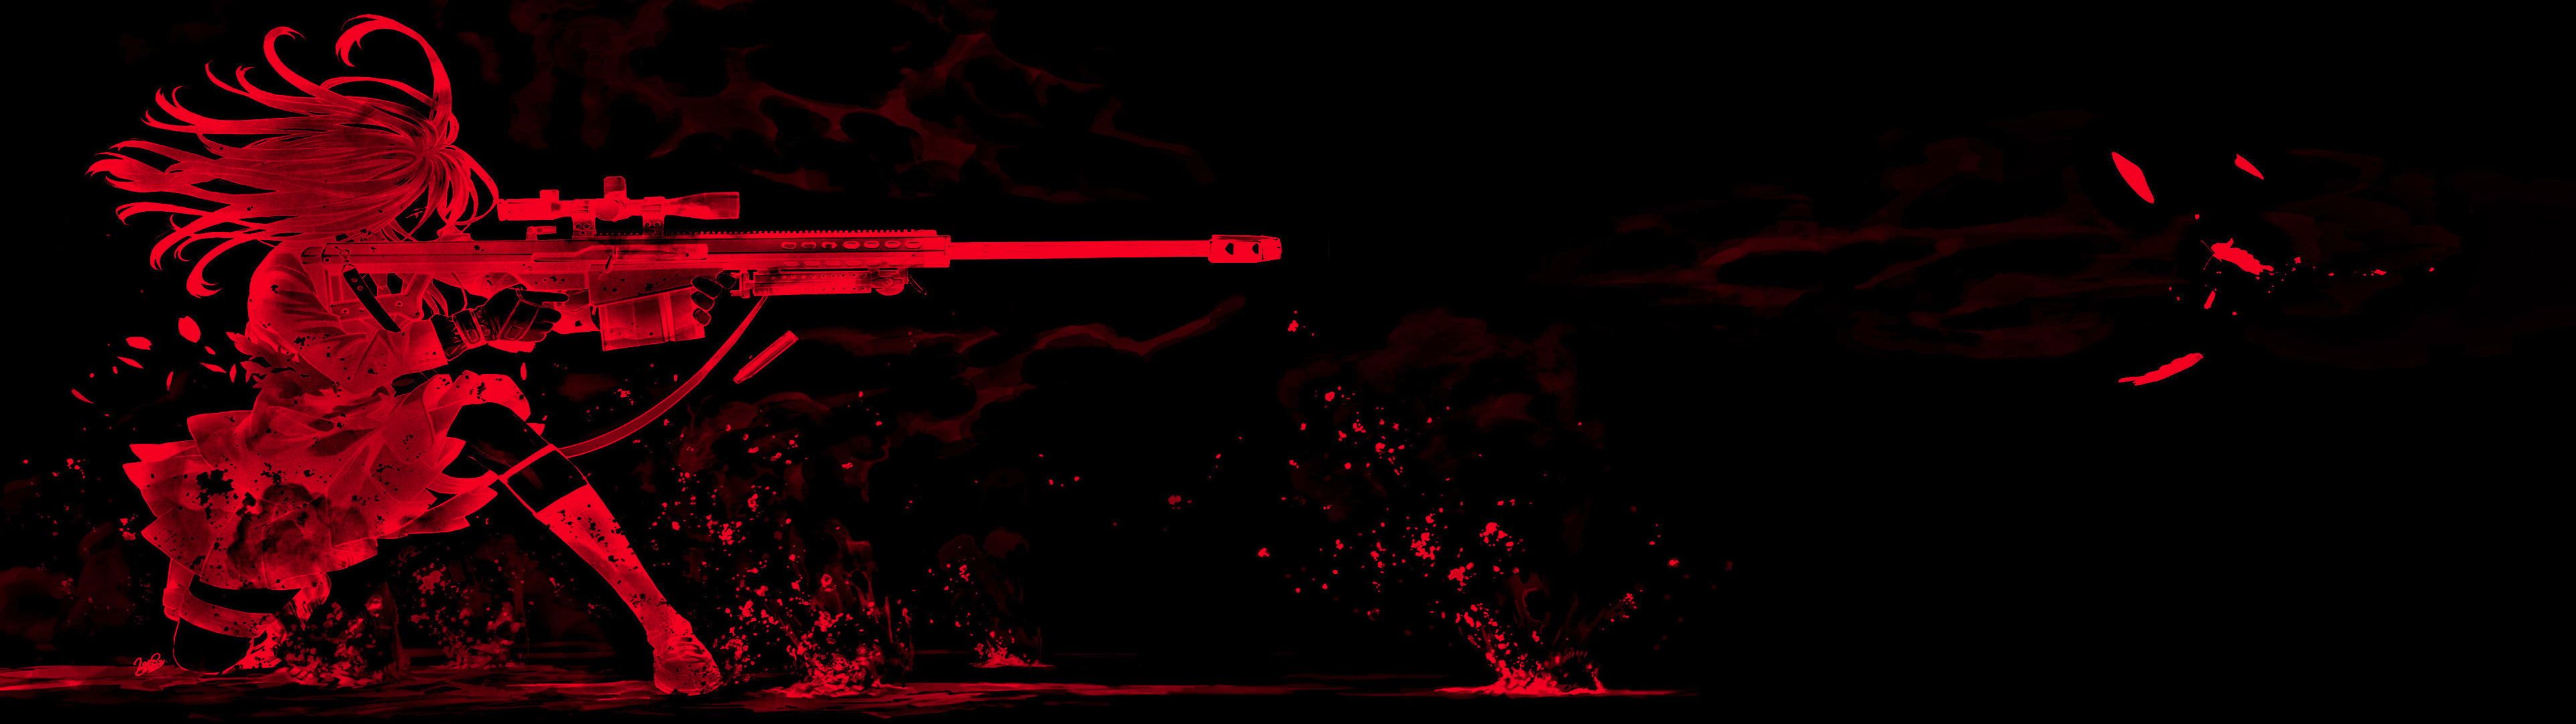 Darkness Black And Red Anime Wallpaper